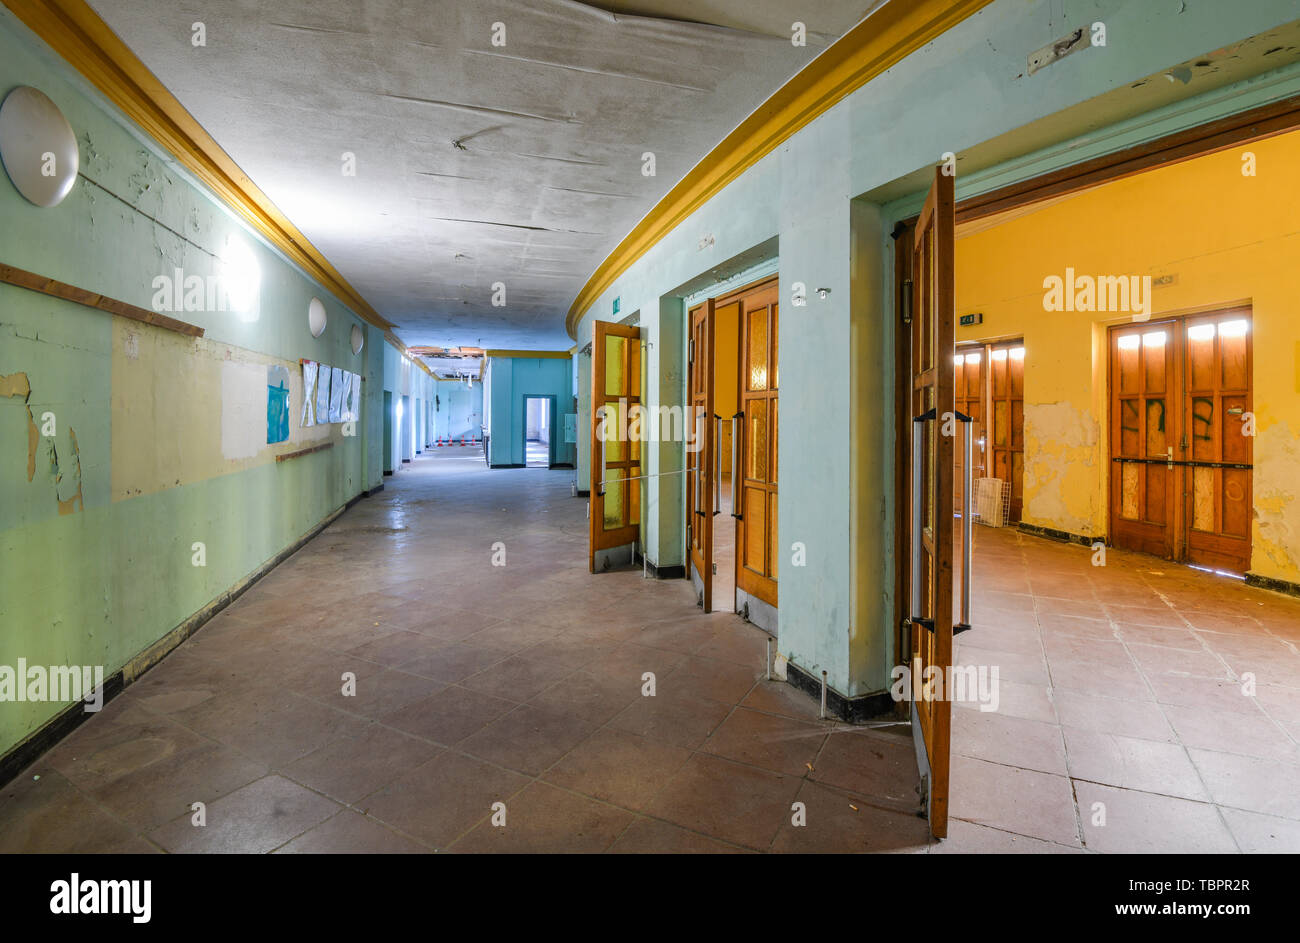 29 May 2019, Brandenburg, Wünsdorf: The former military area Haus der Offiziere - the entrance area in the building of the gymnasiums (since 1945 Konzerthaus). The area was a military gymnasium (1919), then an army sports school (1933) and from 1945 the house of the officers. Photo: Patrick Pleul/dpa-Zentralbild/ZB Stock Photo